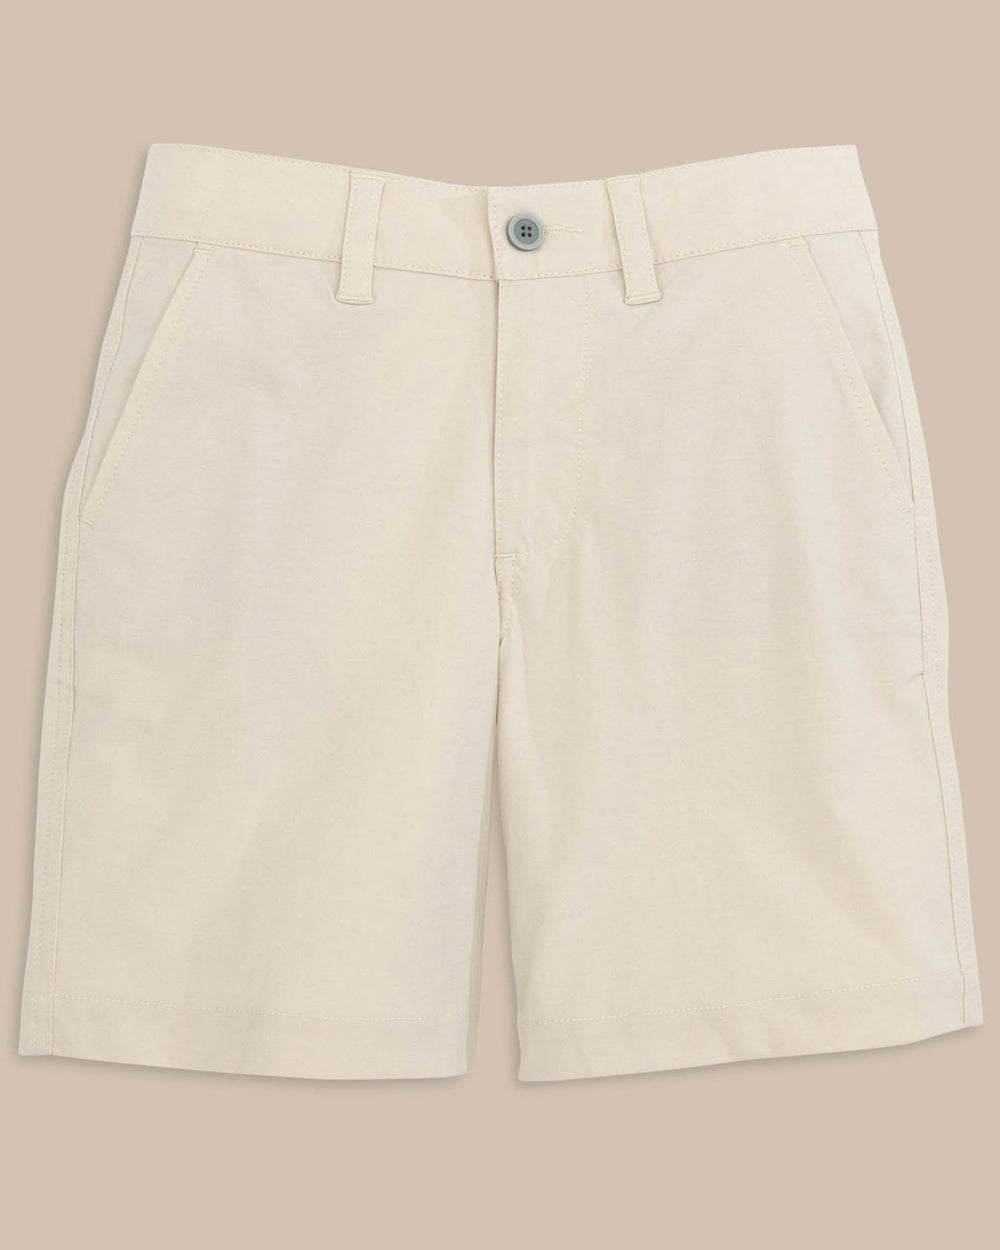 The front view of the Kid's T3 Gulf Short by Southern Tide - Stone